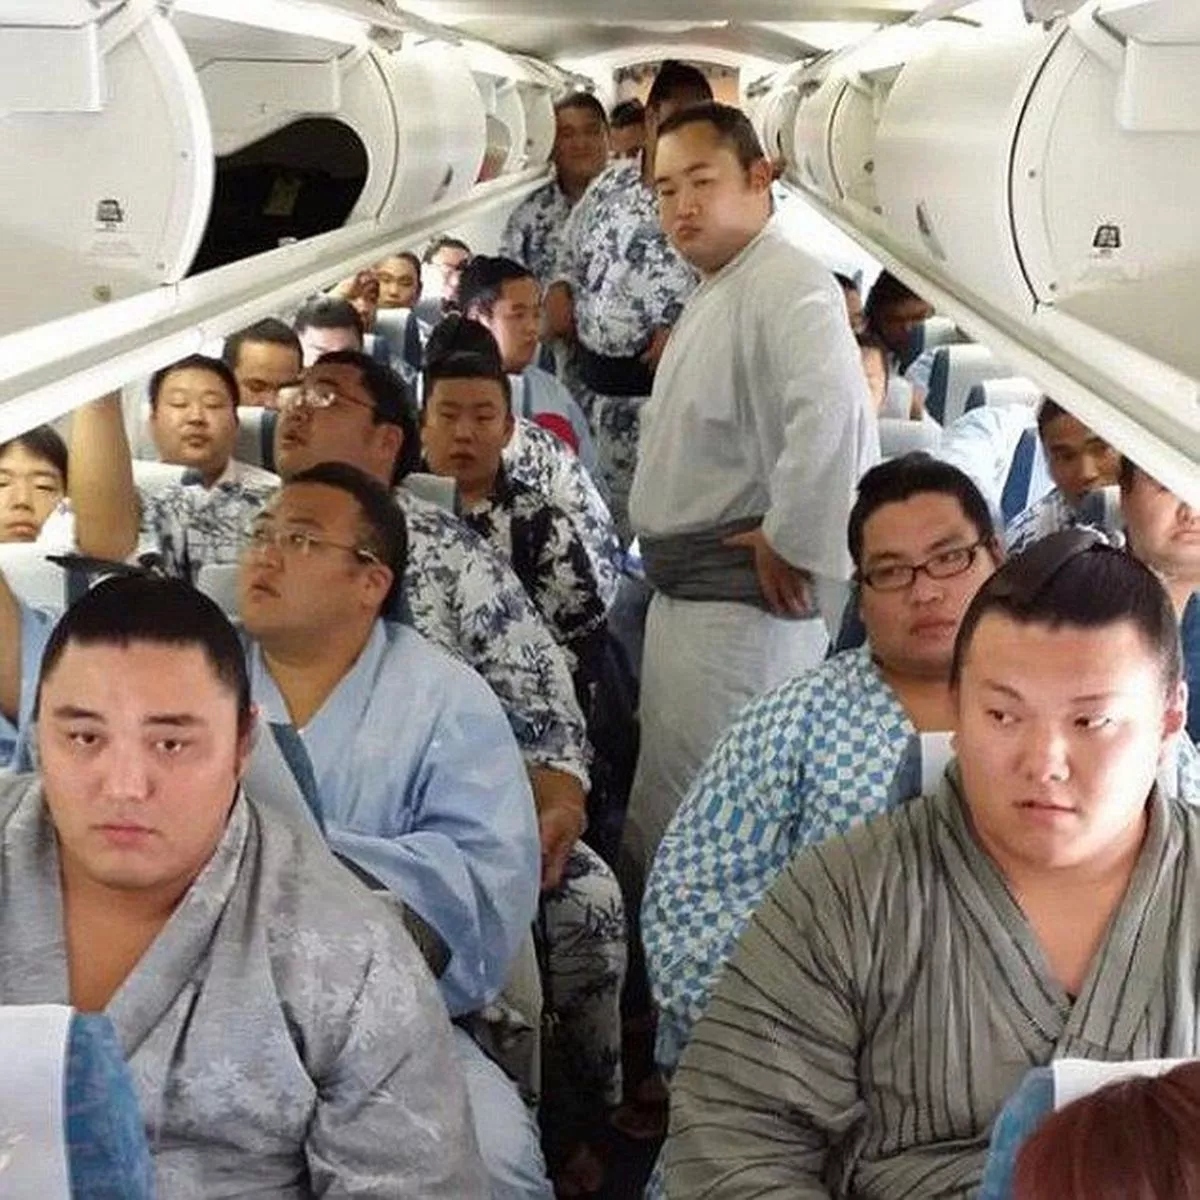 Japanese Airline Forced To Put On Extra Flights As Sumo Wrestlers Overload Planes